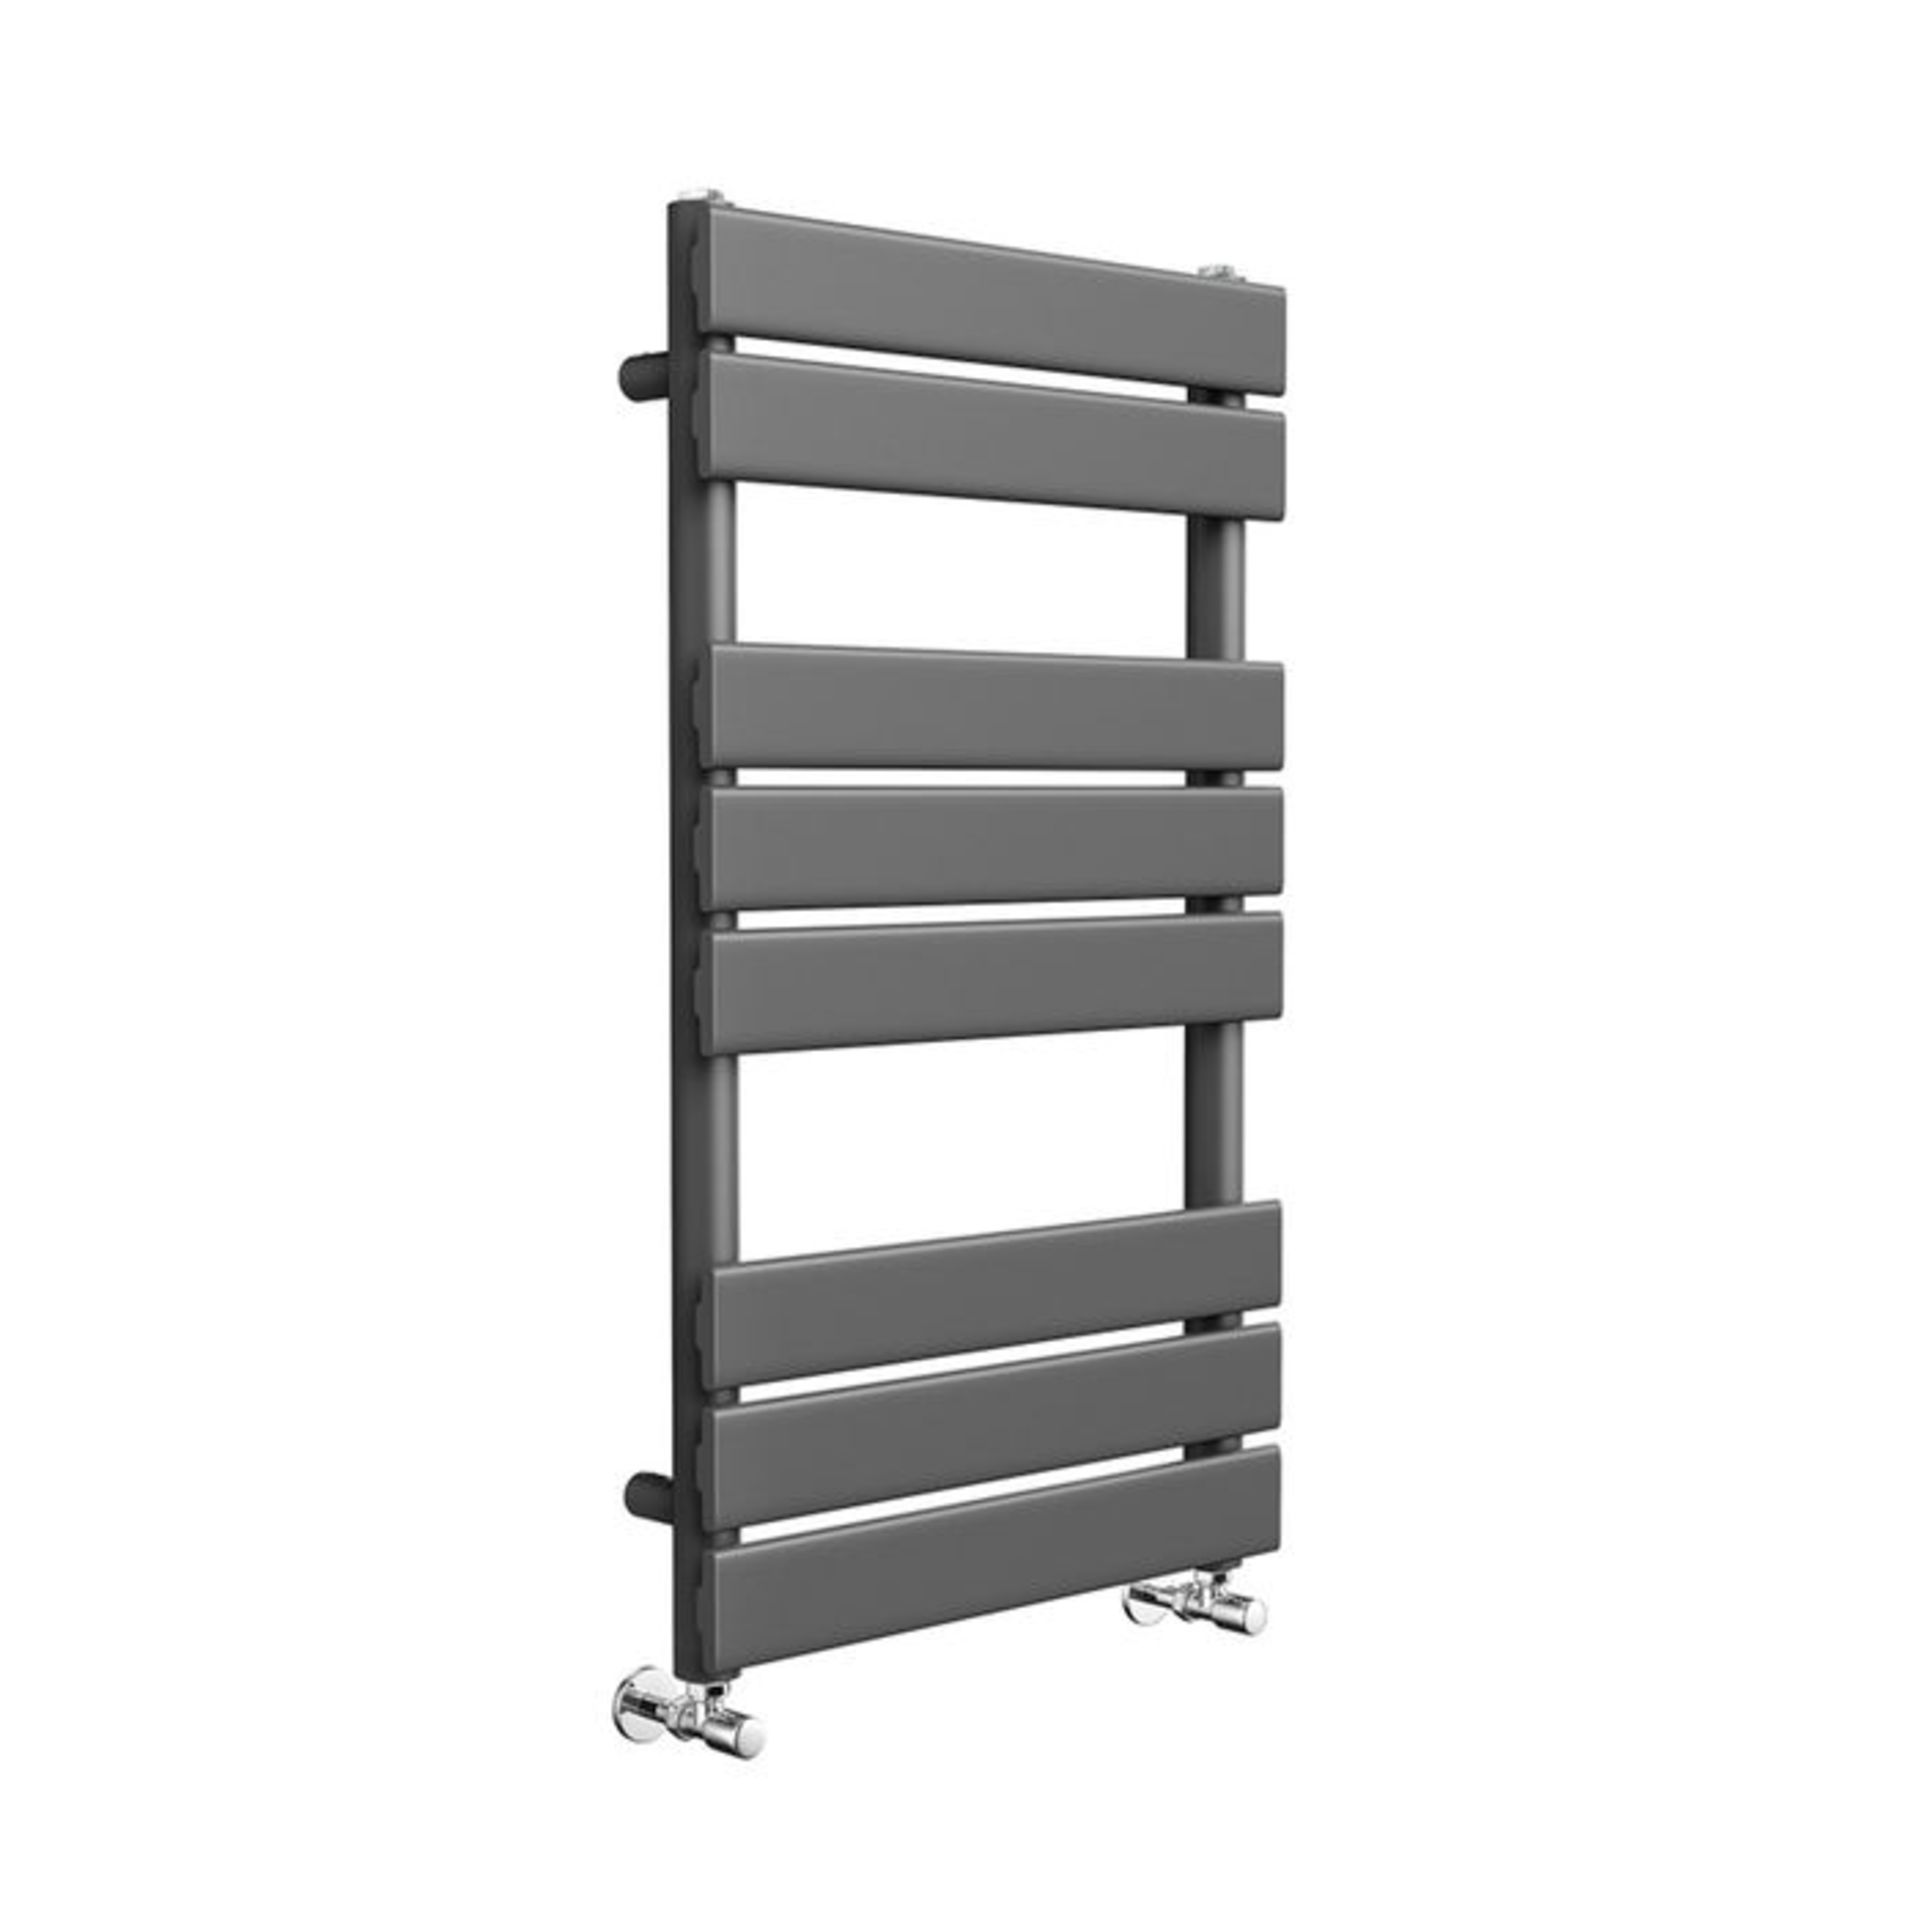 (XS320) 800x450mm Anthracite Flat Panel Ladder Towel Radiator. Made with low carbon steel, - Image 3 of 3